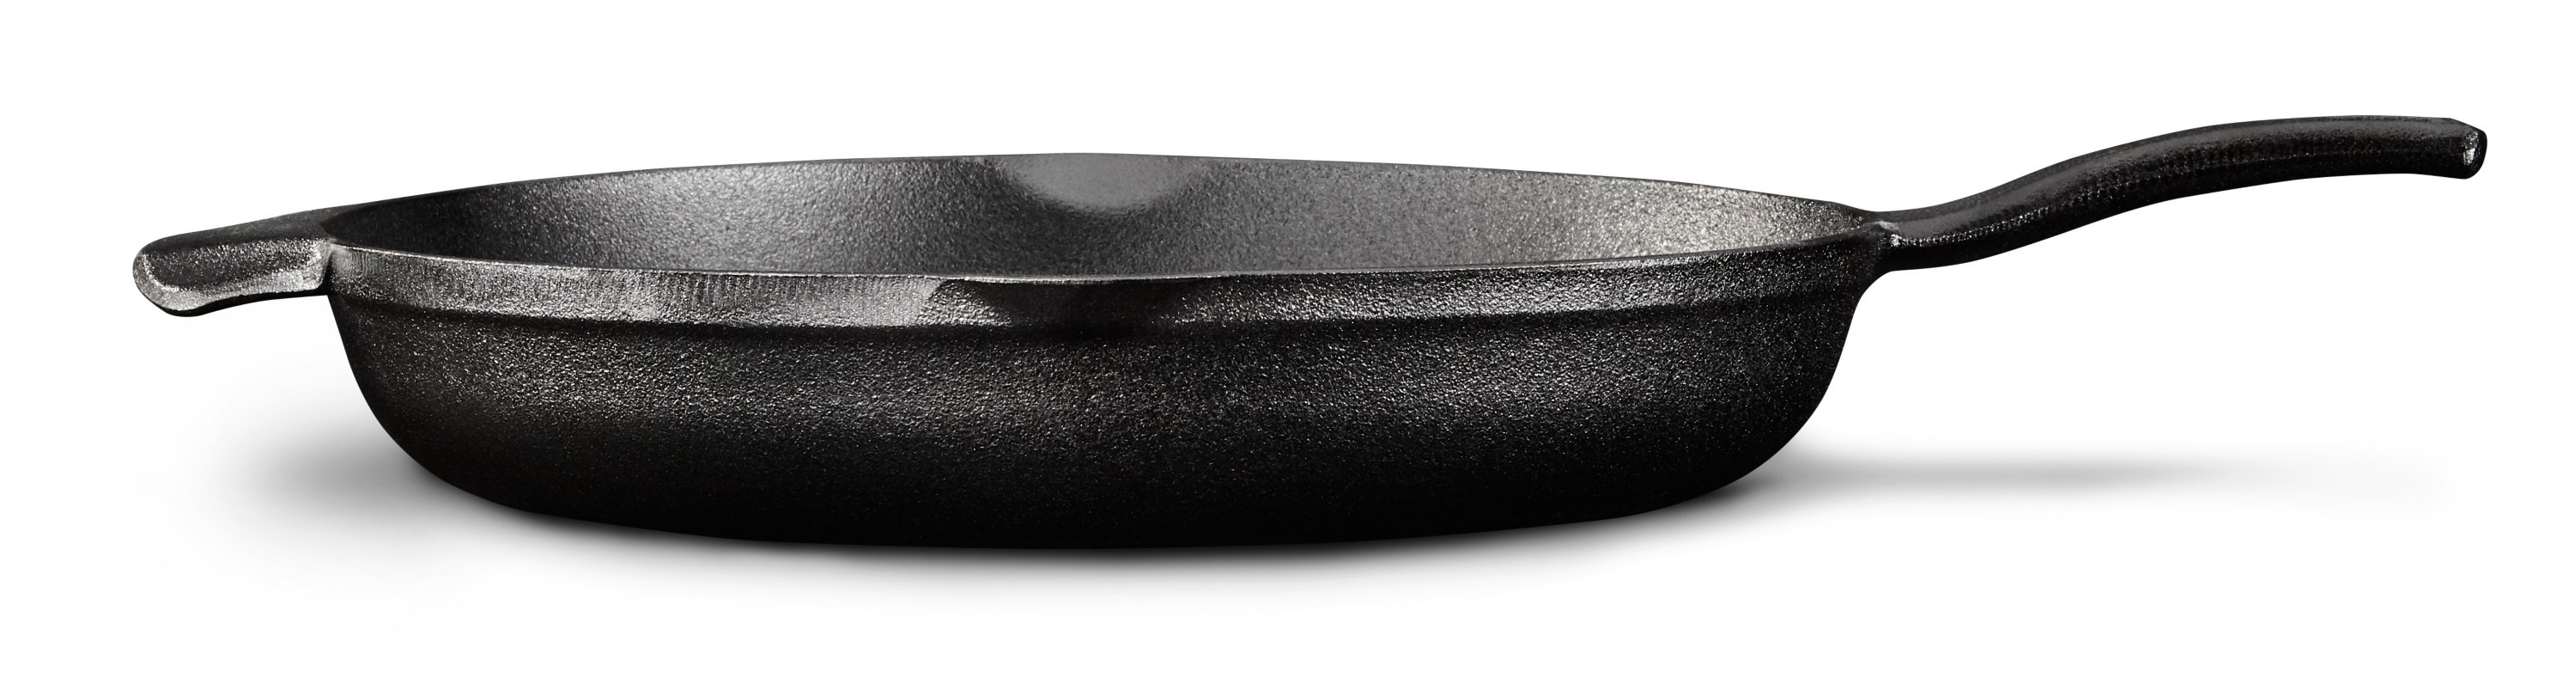 https://newellbrands.scene7.com/is/image//NewellRubbermaid/1873975-cast-iron-12in-skillet-side-view-straight-on-2